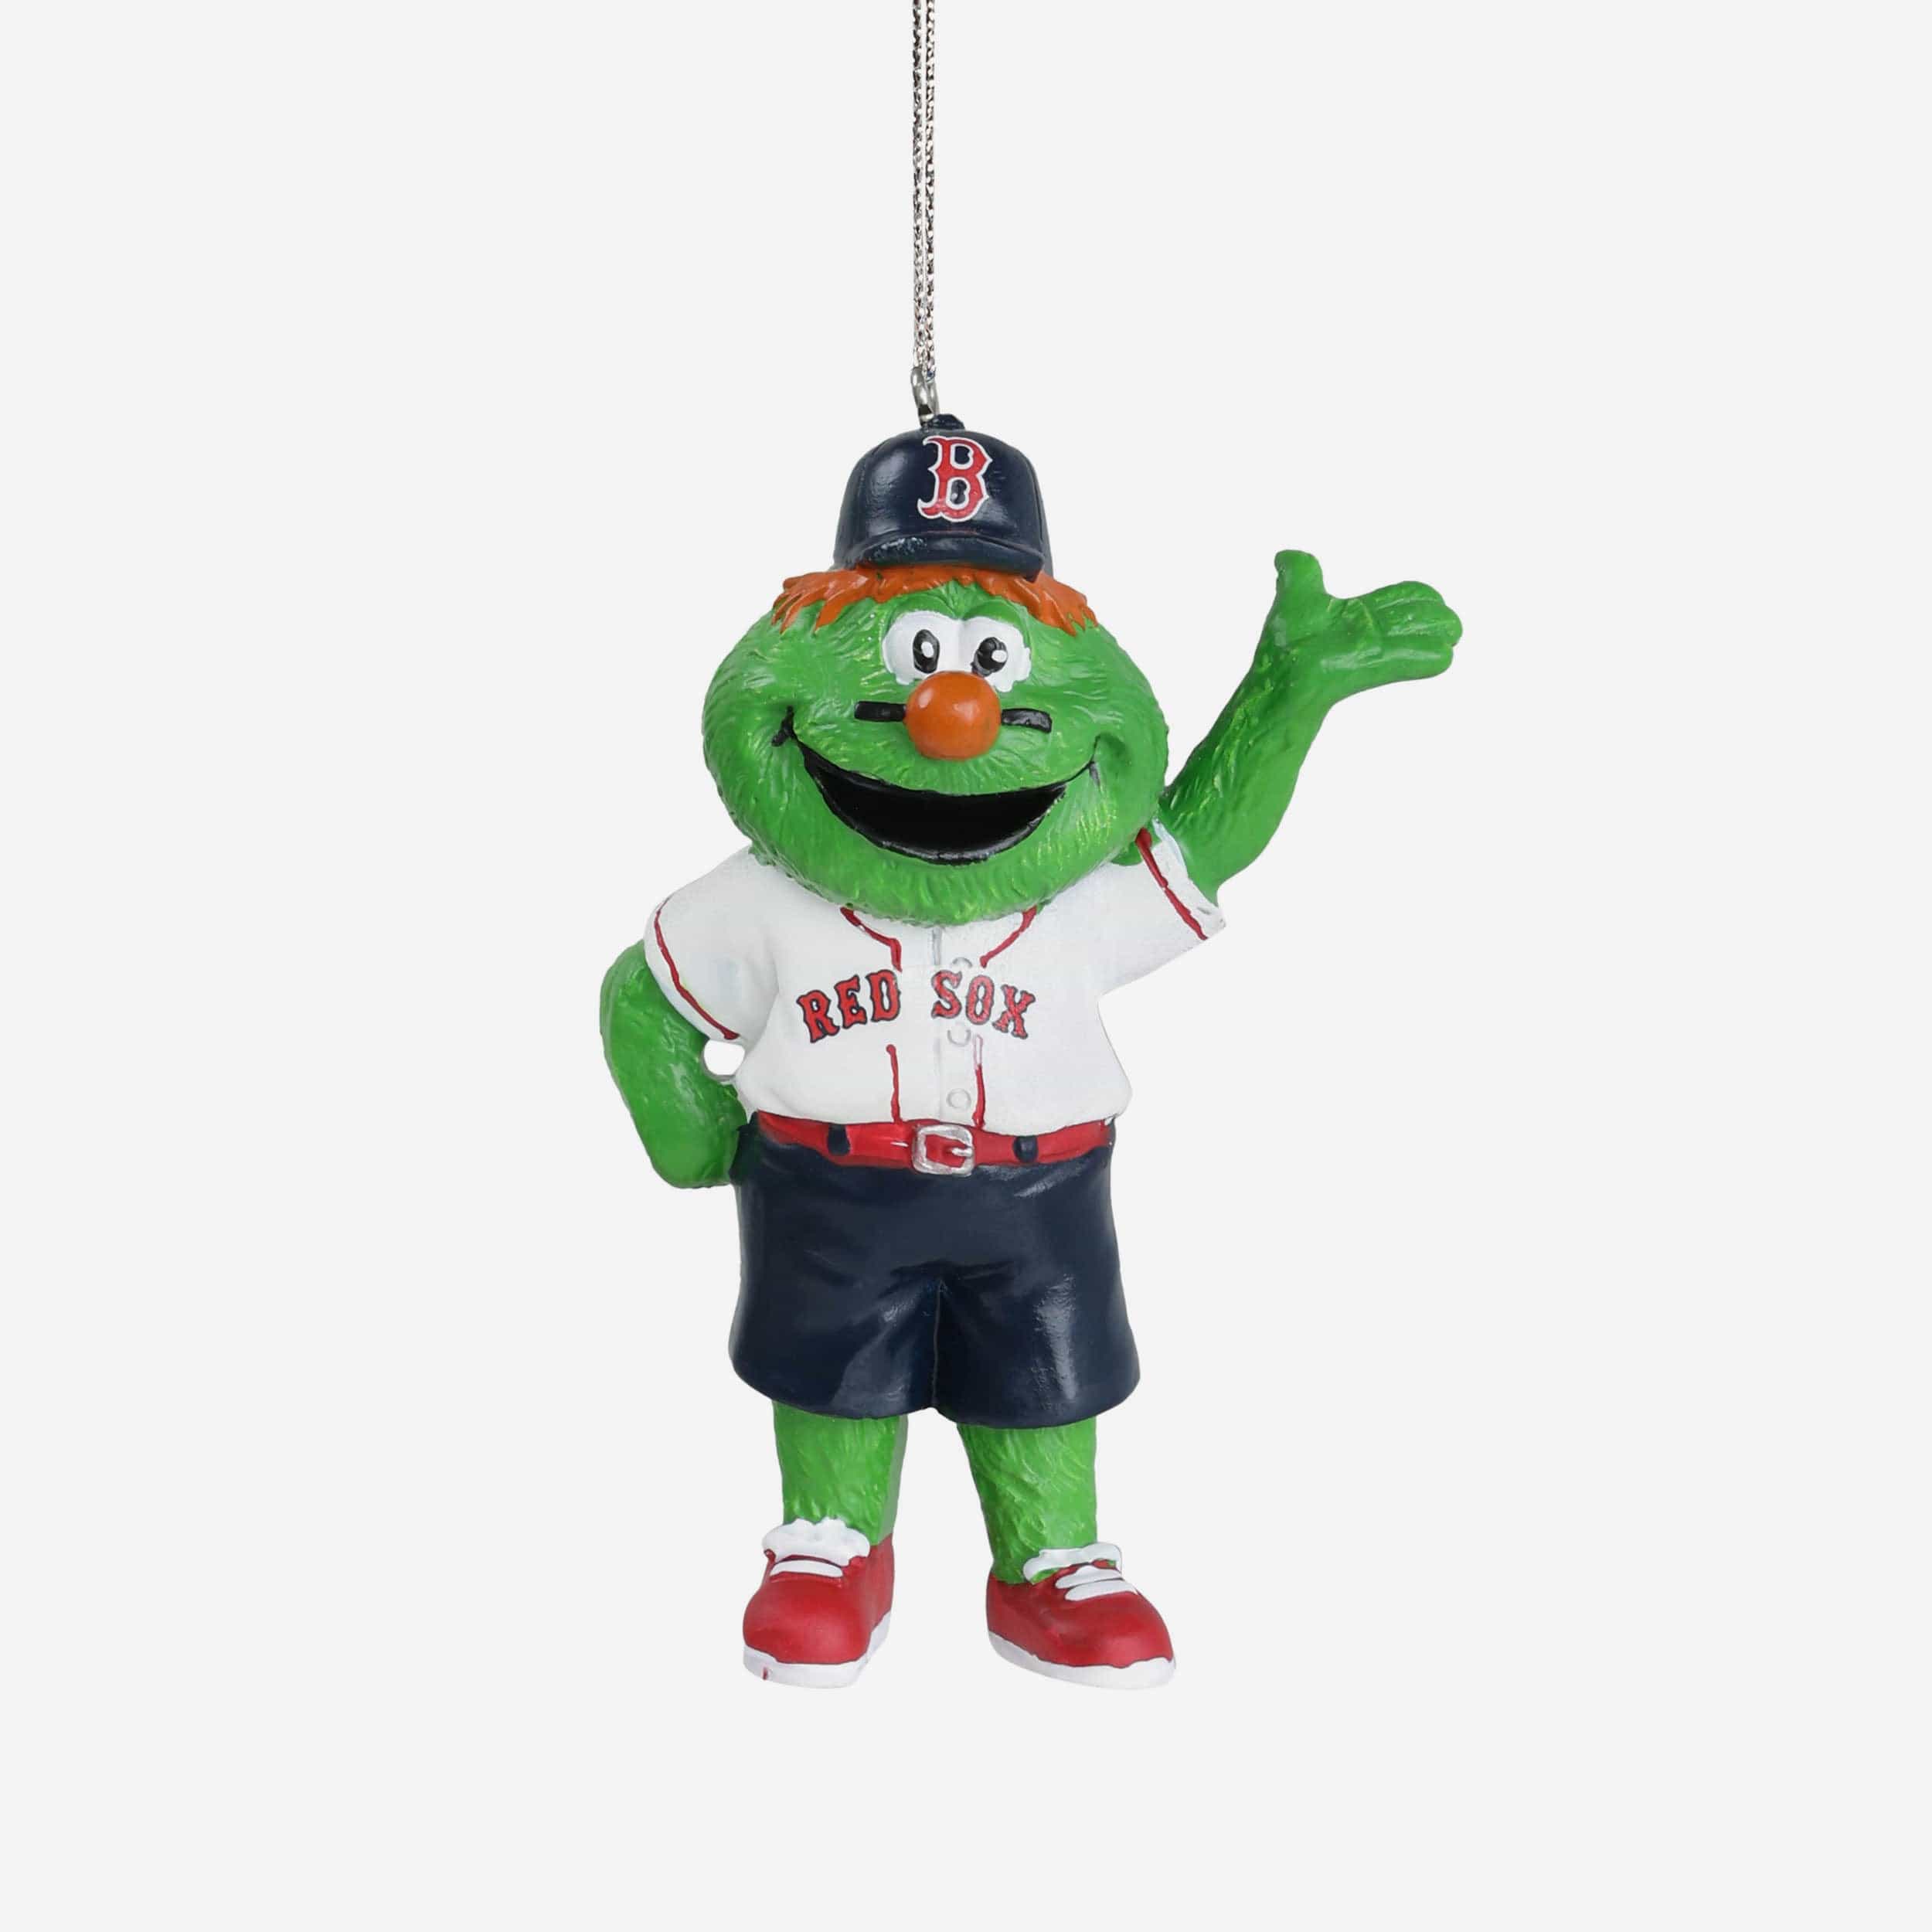 Wally the Green Monster Boston Red Sox Mascot Ornament